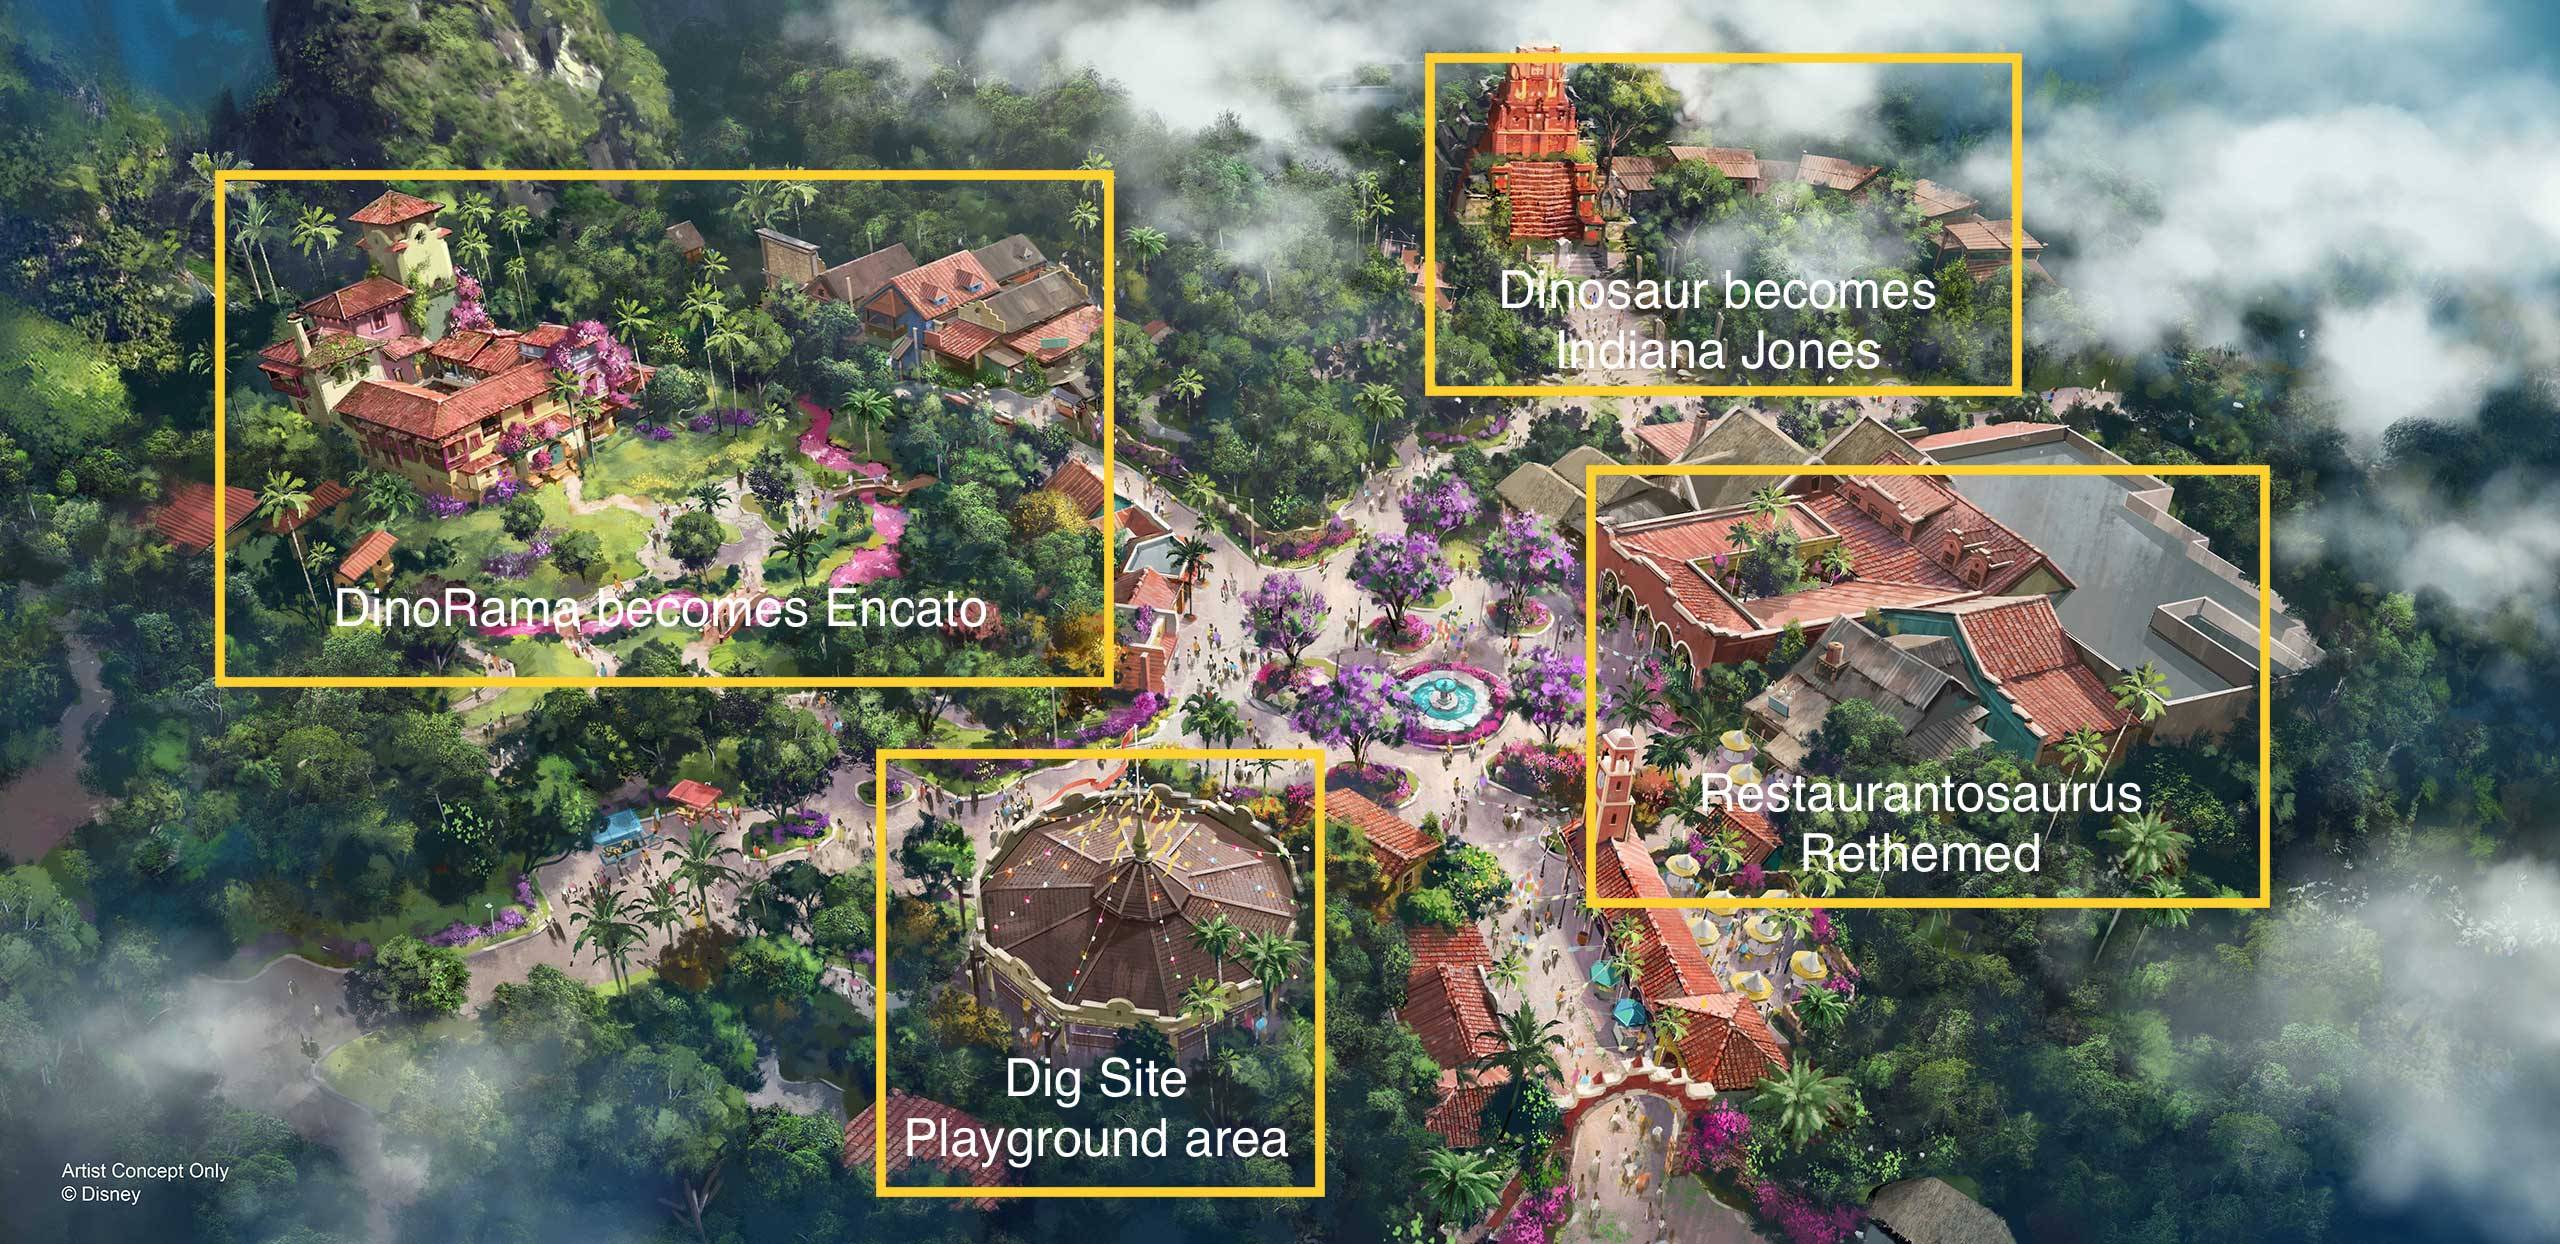 New experiences inspired by “Encanto” and the fan-favorite adventurer Indiana Jones are being considered for the reimagined land at Disney’s Animal Kingdom